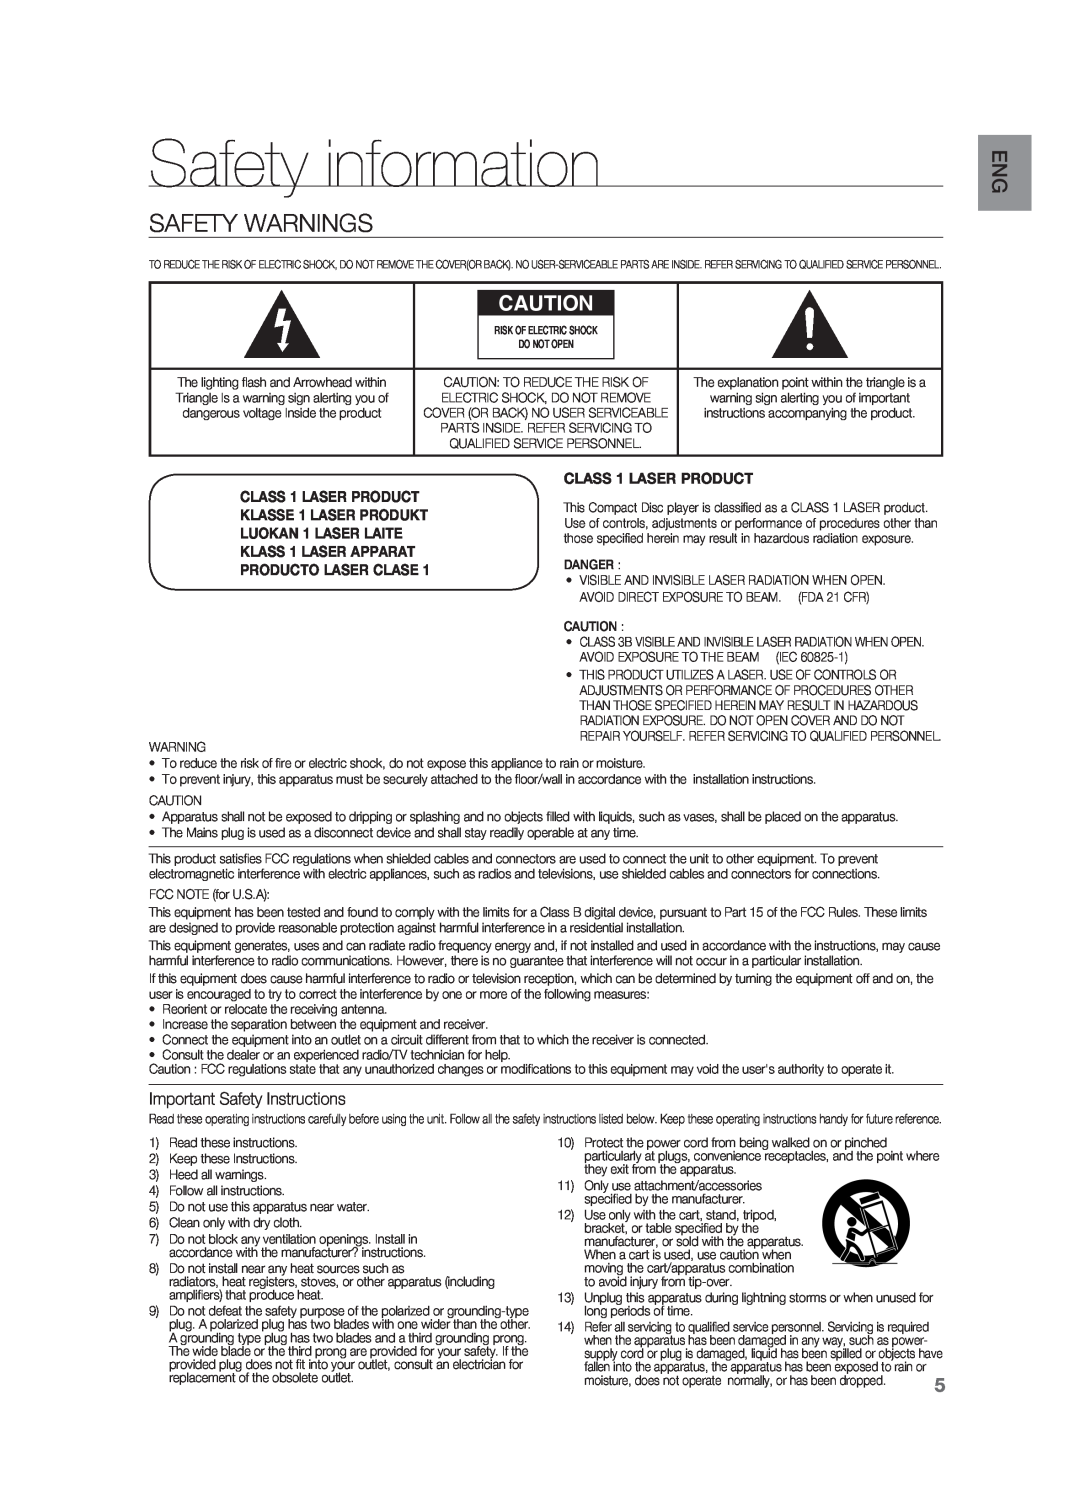 Samsung HT-BD3252A Safety information, Safety Warnings, CLASS 1 LASER PRODUCT, LUOKAN 1 LASER LAITE, Producto Laser Clase 